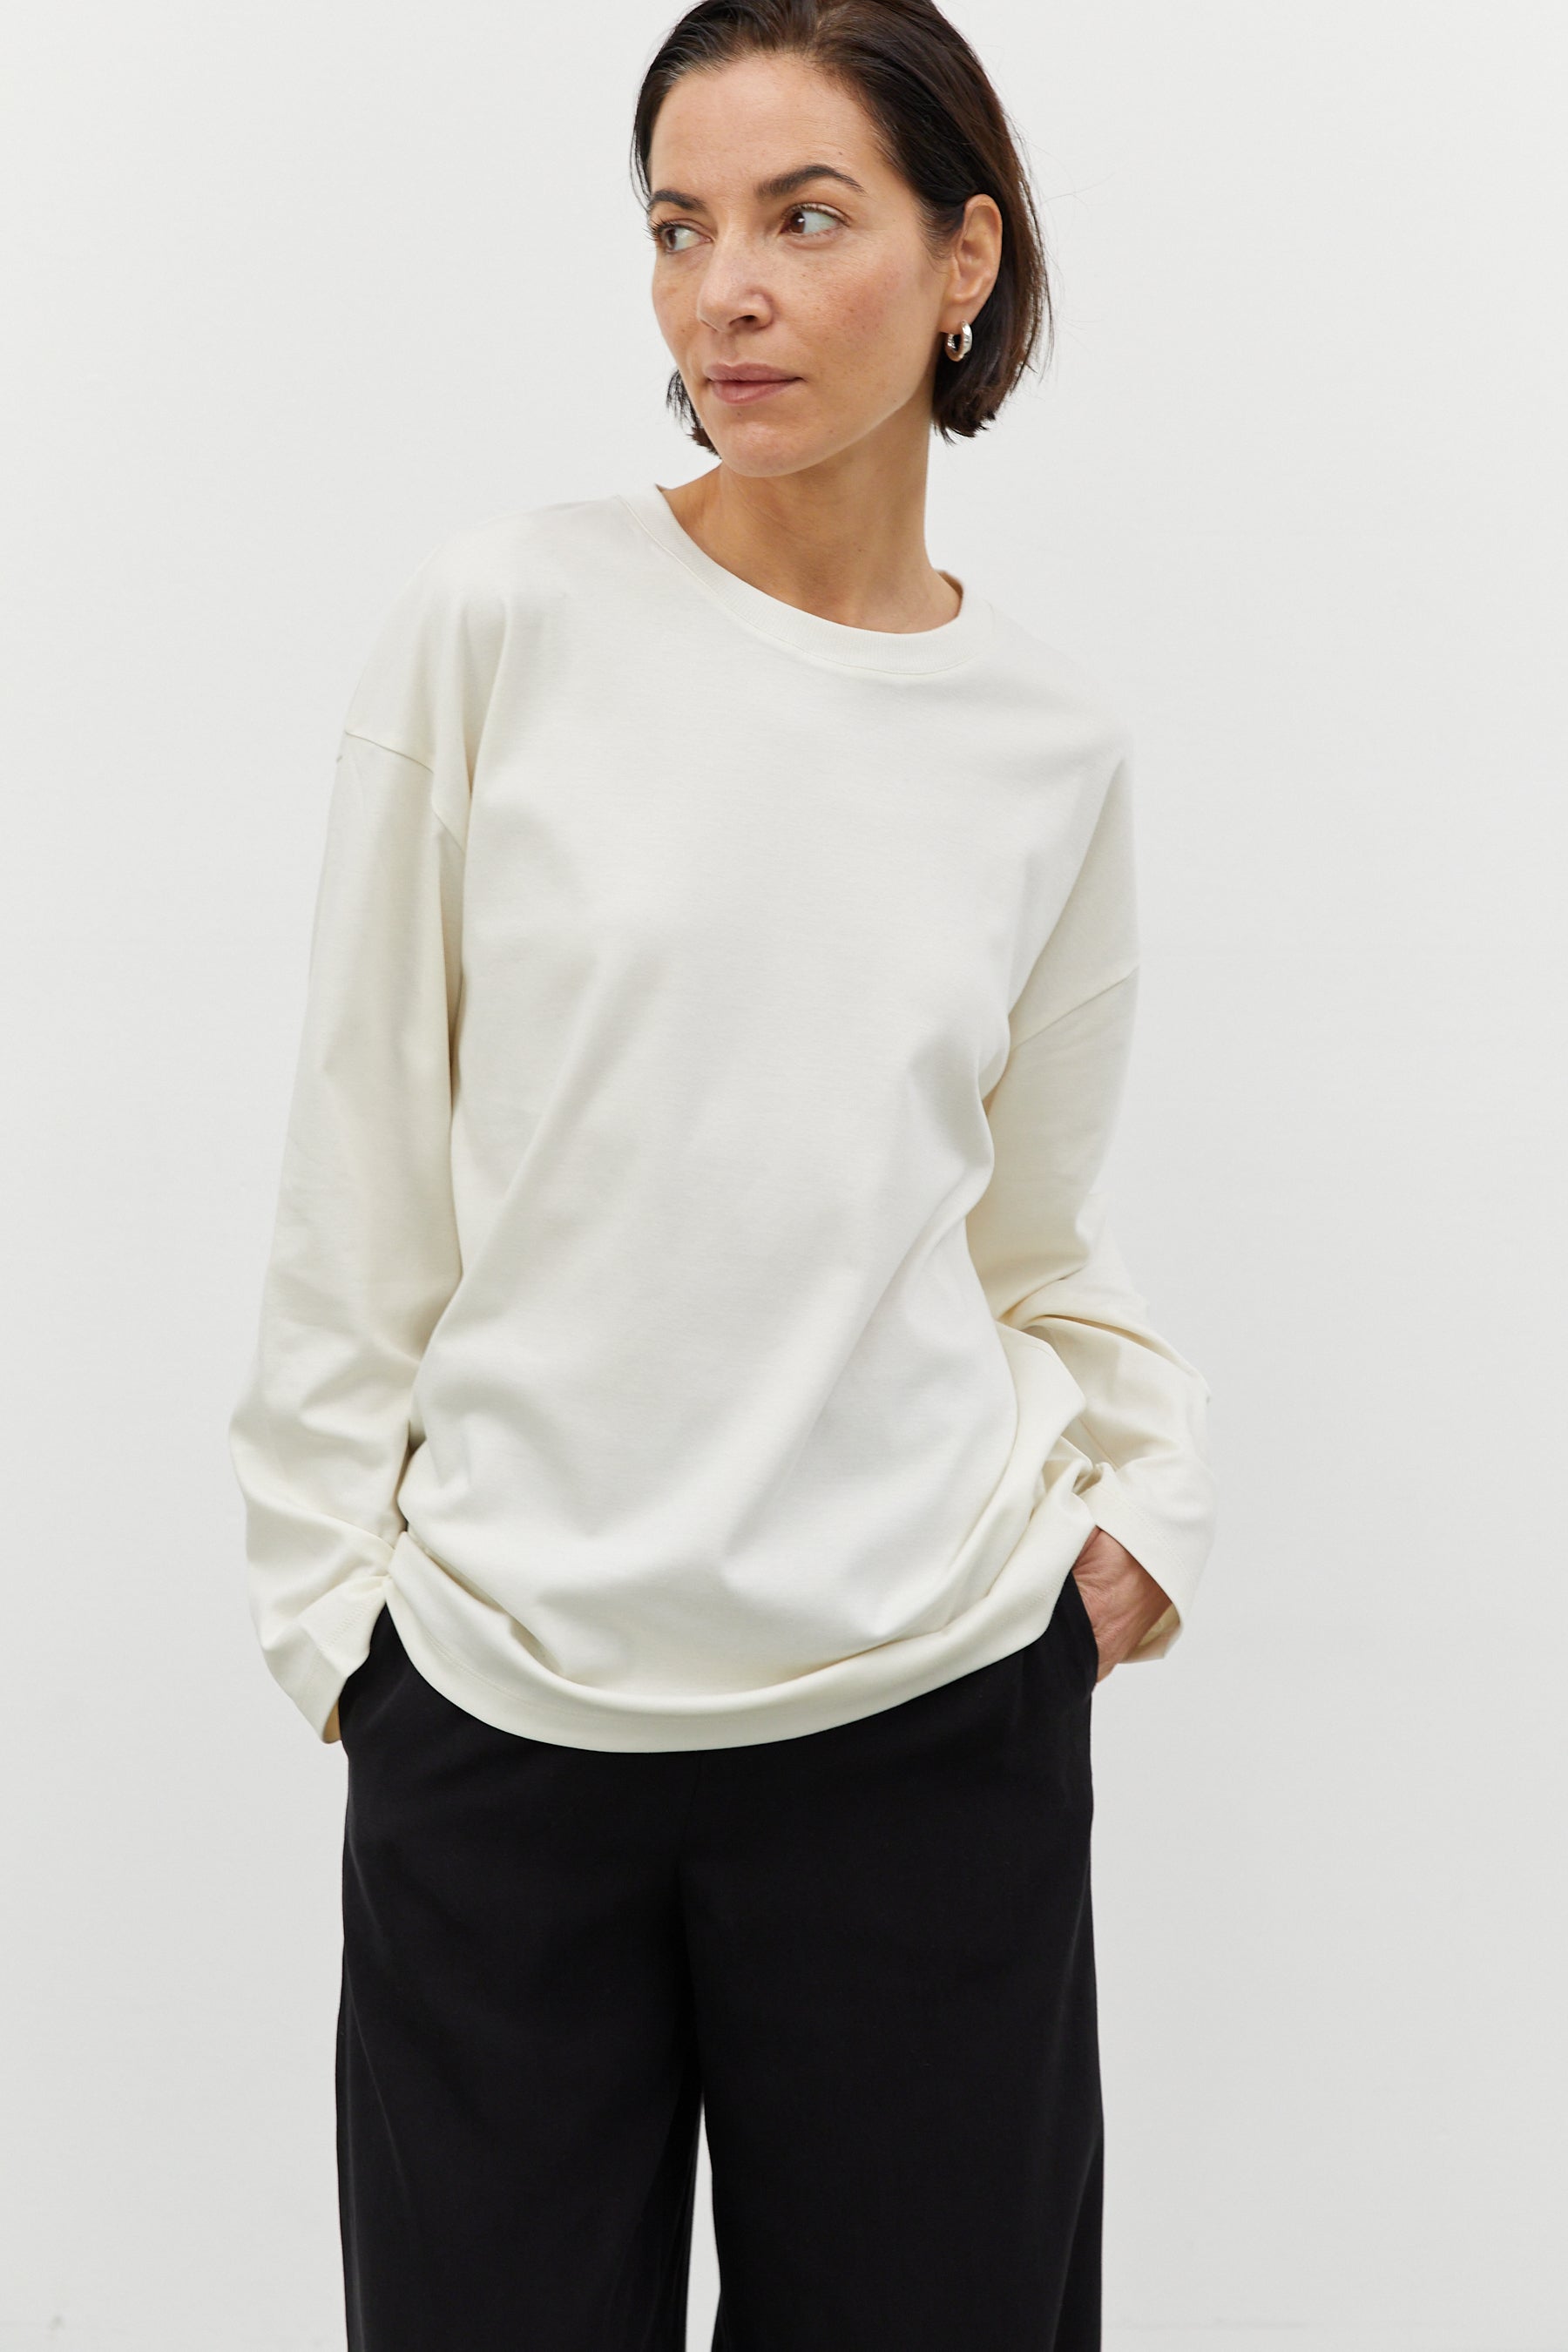 Curate - Sustainable & Ethical Women's Apparel - Shirts & Tops